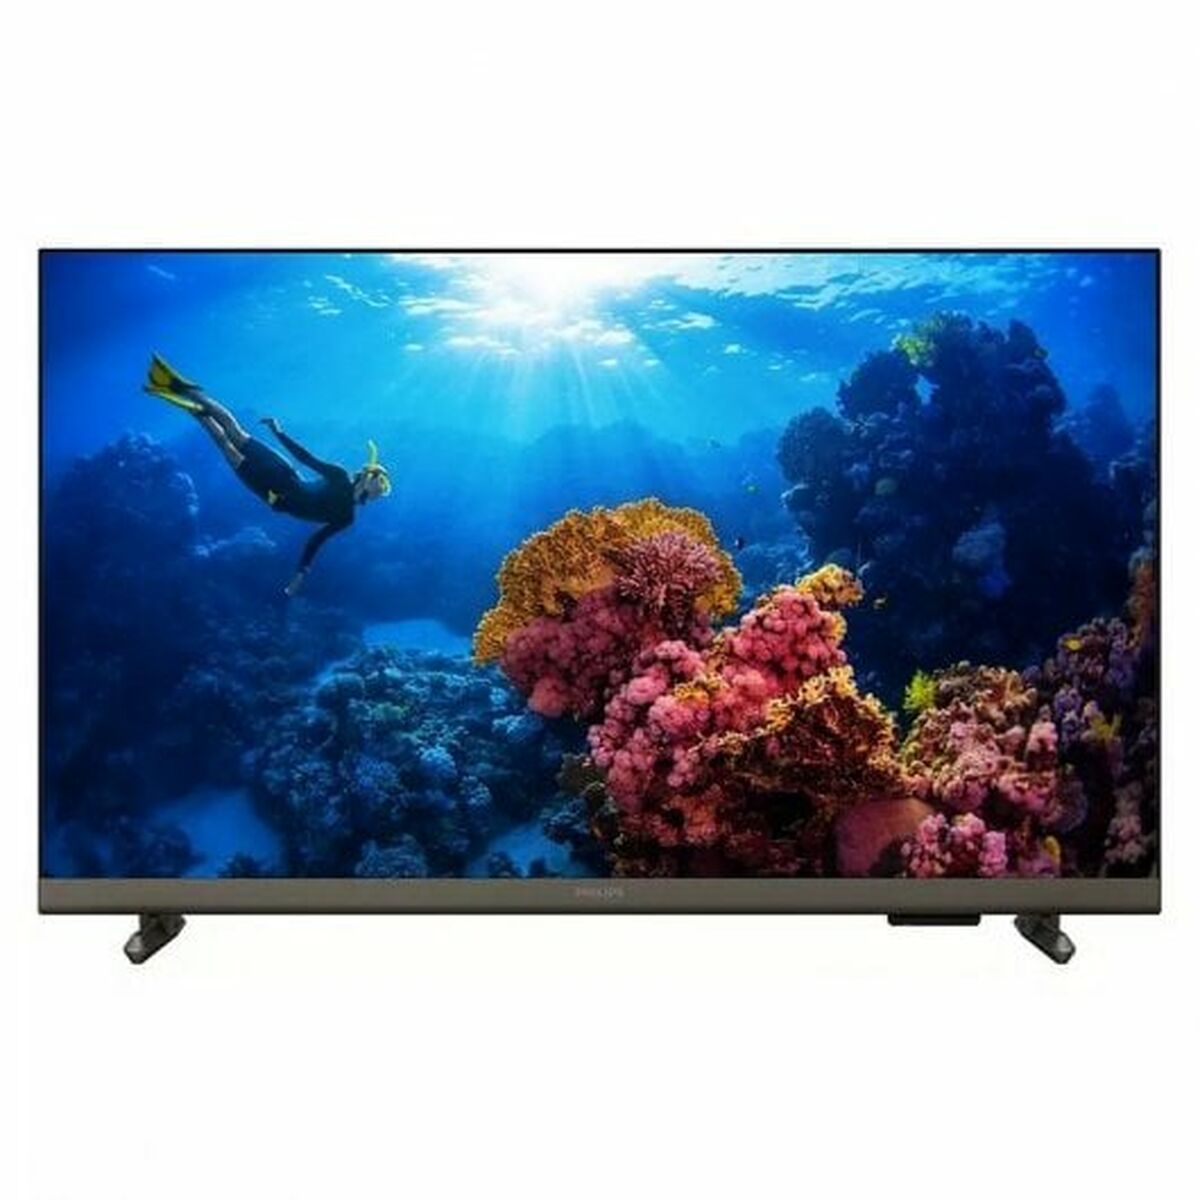 Smart TV Philips 32PHS6808/12 HD LED HDR Dolby Digital, Philips, Electronics, TV, Video and home cinema, smart-tv-philips-32phs6808-12-hd-led-hdr-dolby-digital, Brand_Philips, category-reference-2609, category-reference-2625, category-reference-2931, category-reference-t-18805, category-reference-t-18827, category-reference-t-19653, cinema and television, Condition_NEW, entertainment, Price_200 - 300, RiotNook